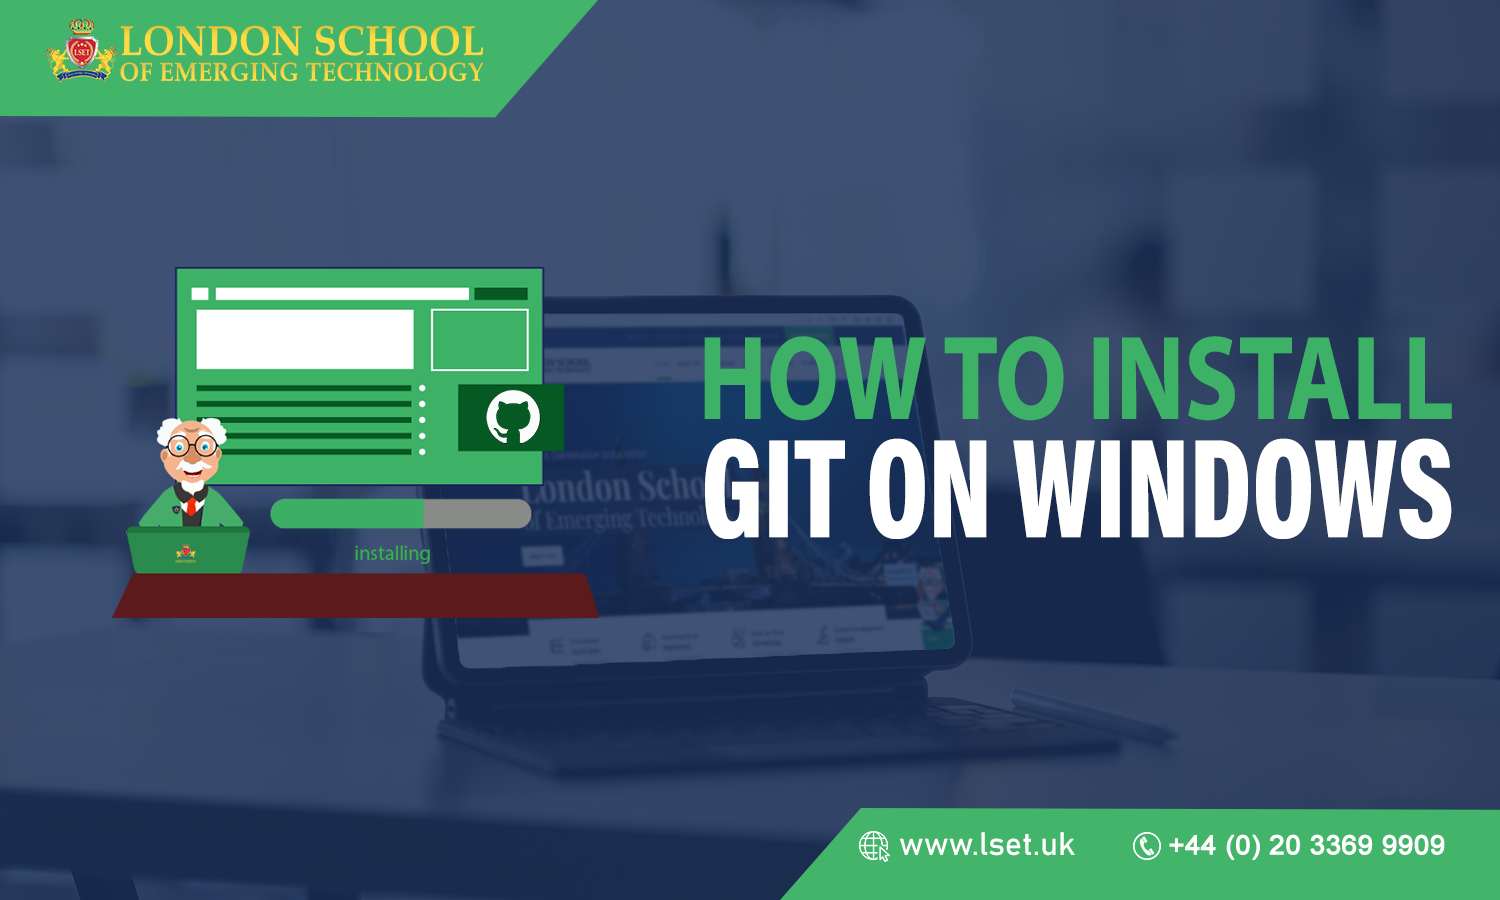 How To Install Git On Windows (1)